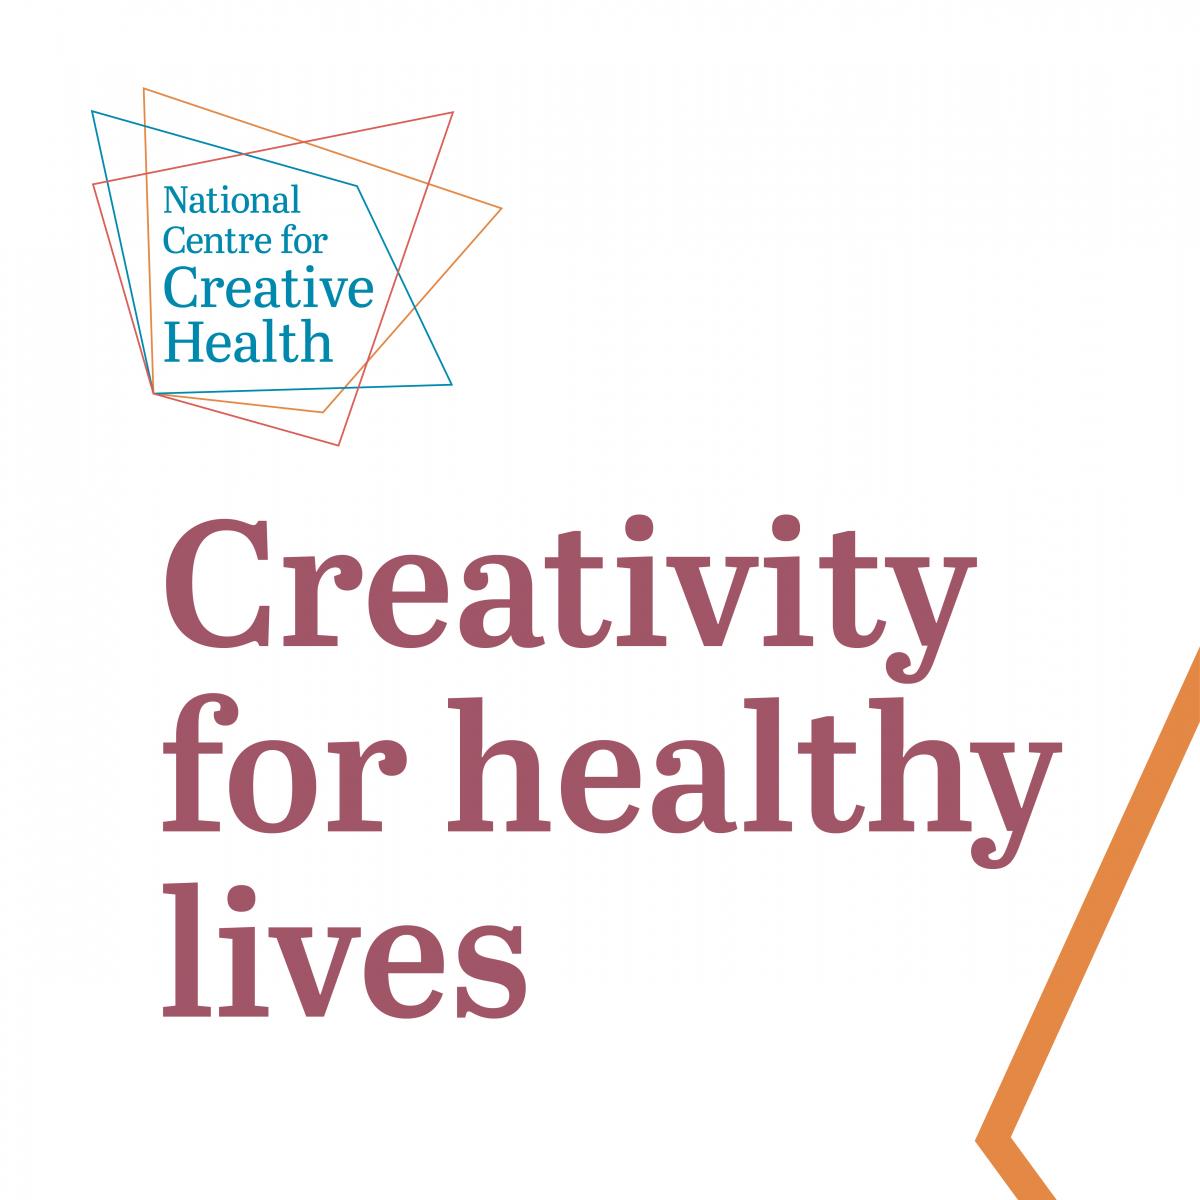 logo for NCCH and strapline "Creativity for healthy lives"